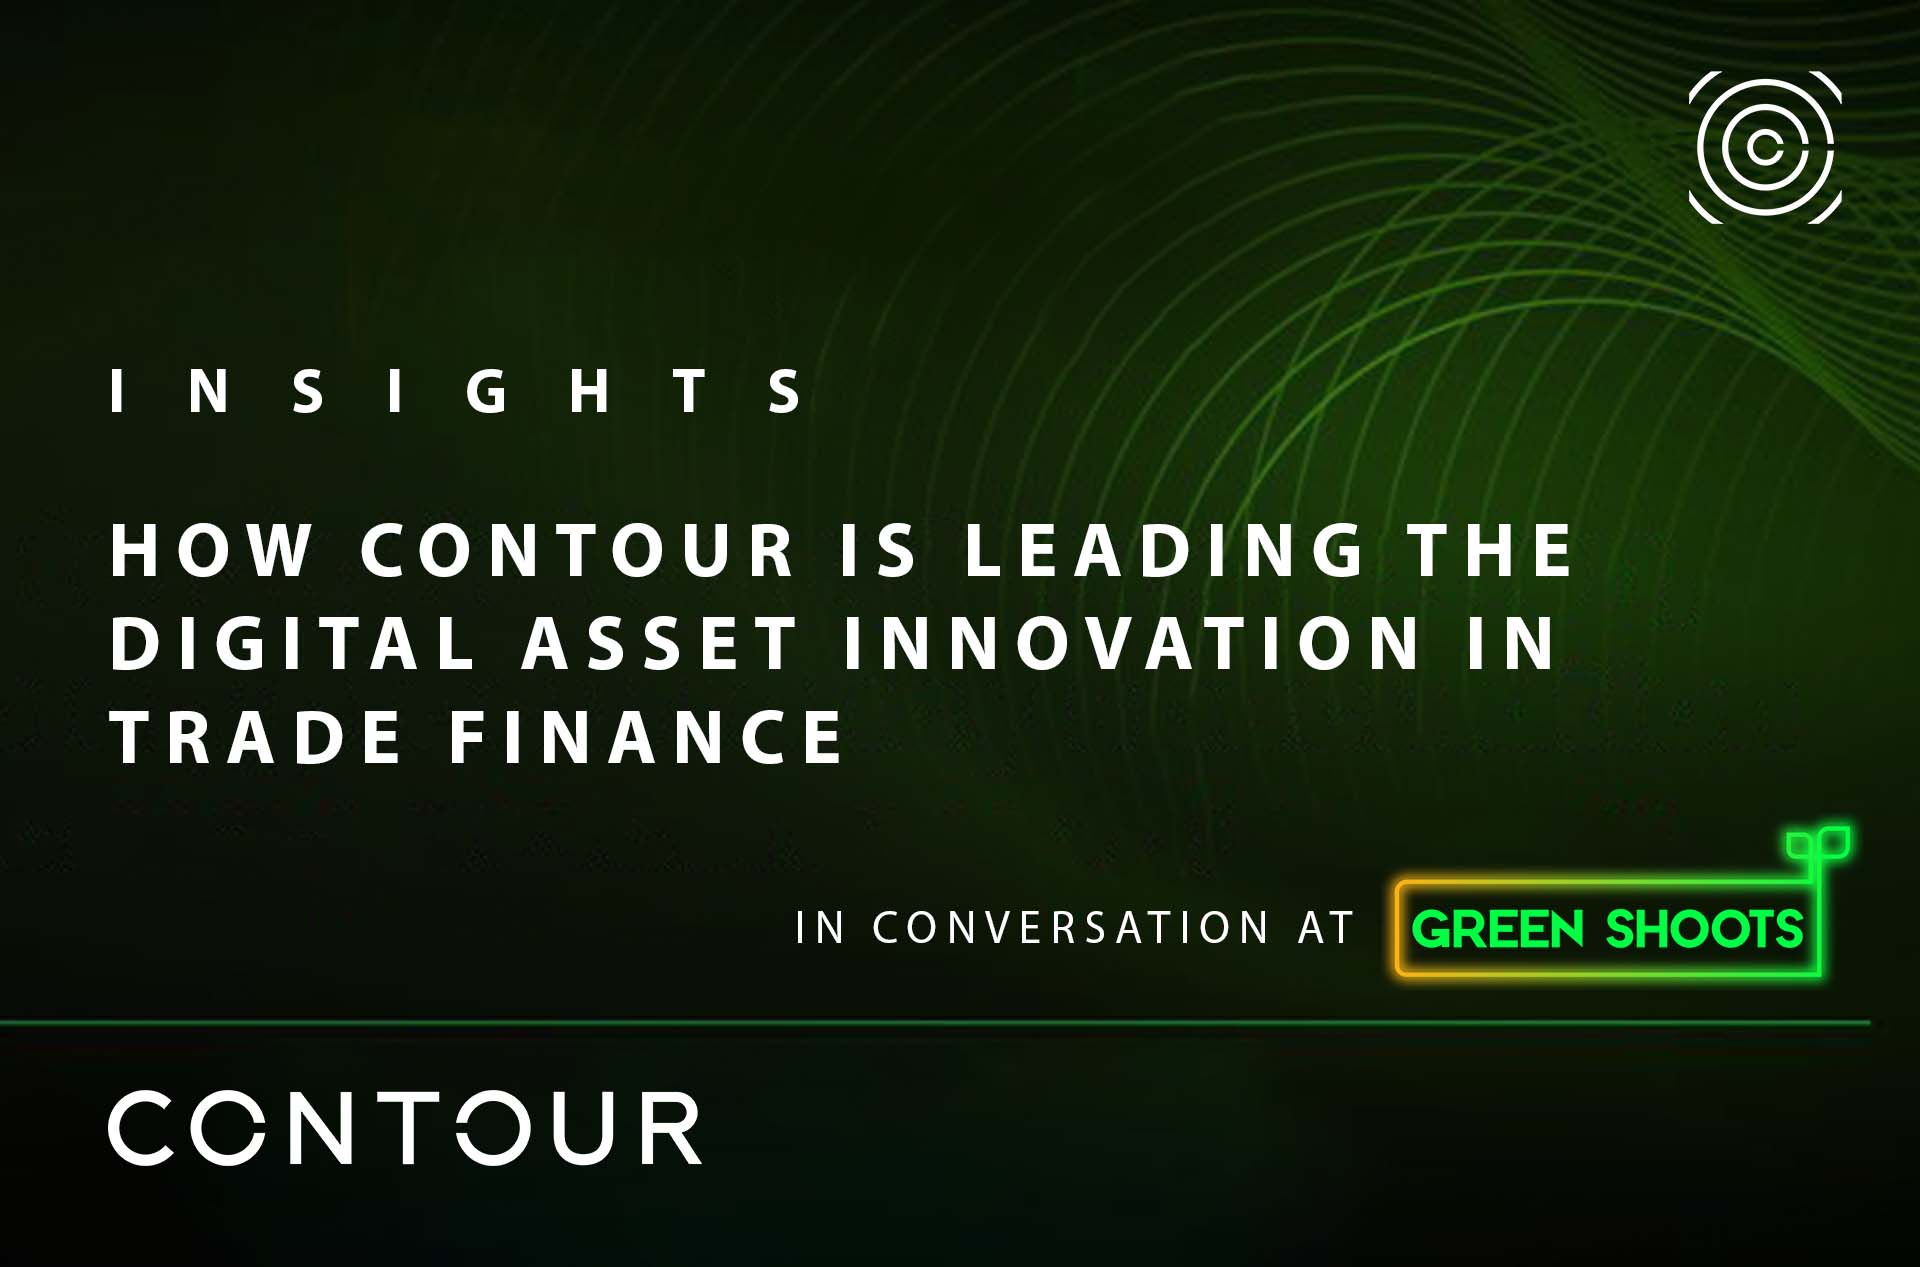 How Contour is leading digital asset innovation in trade finance